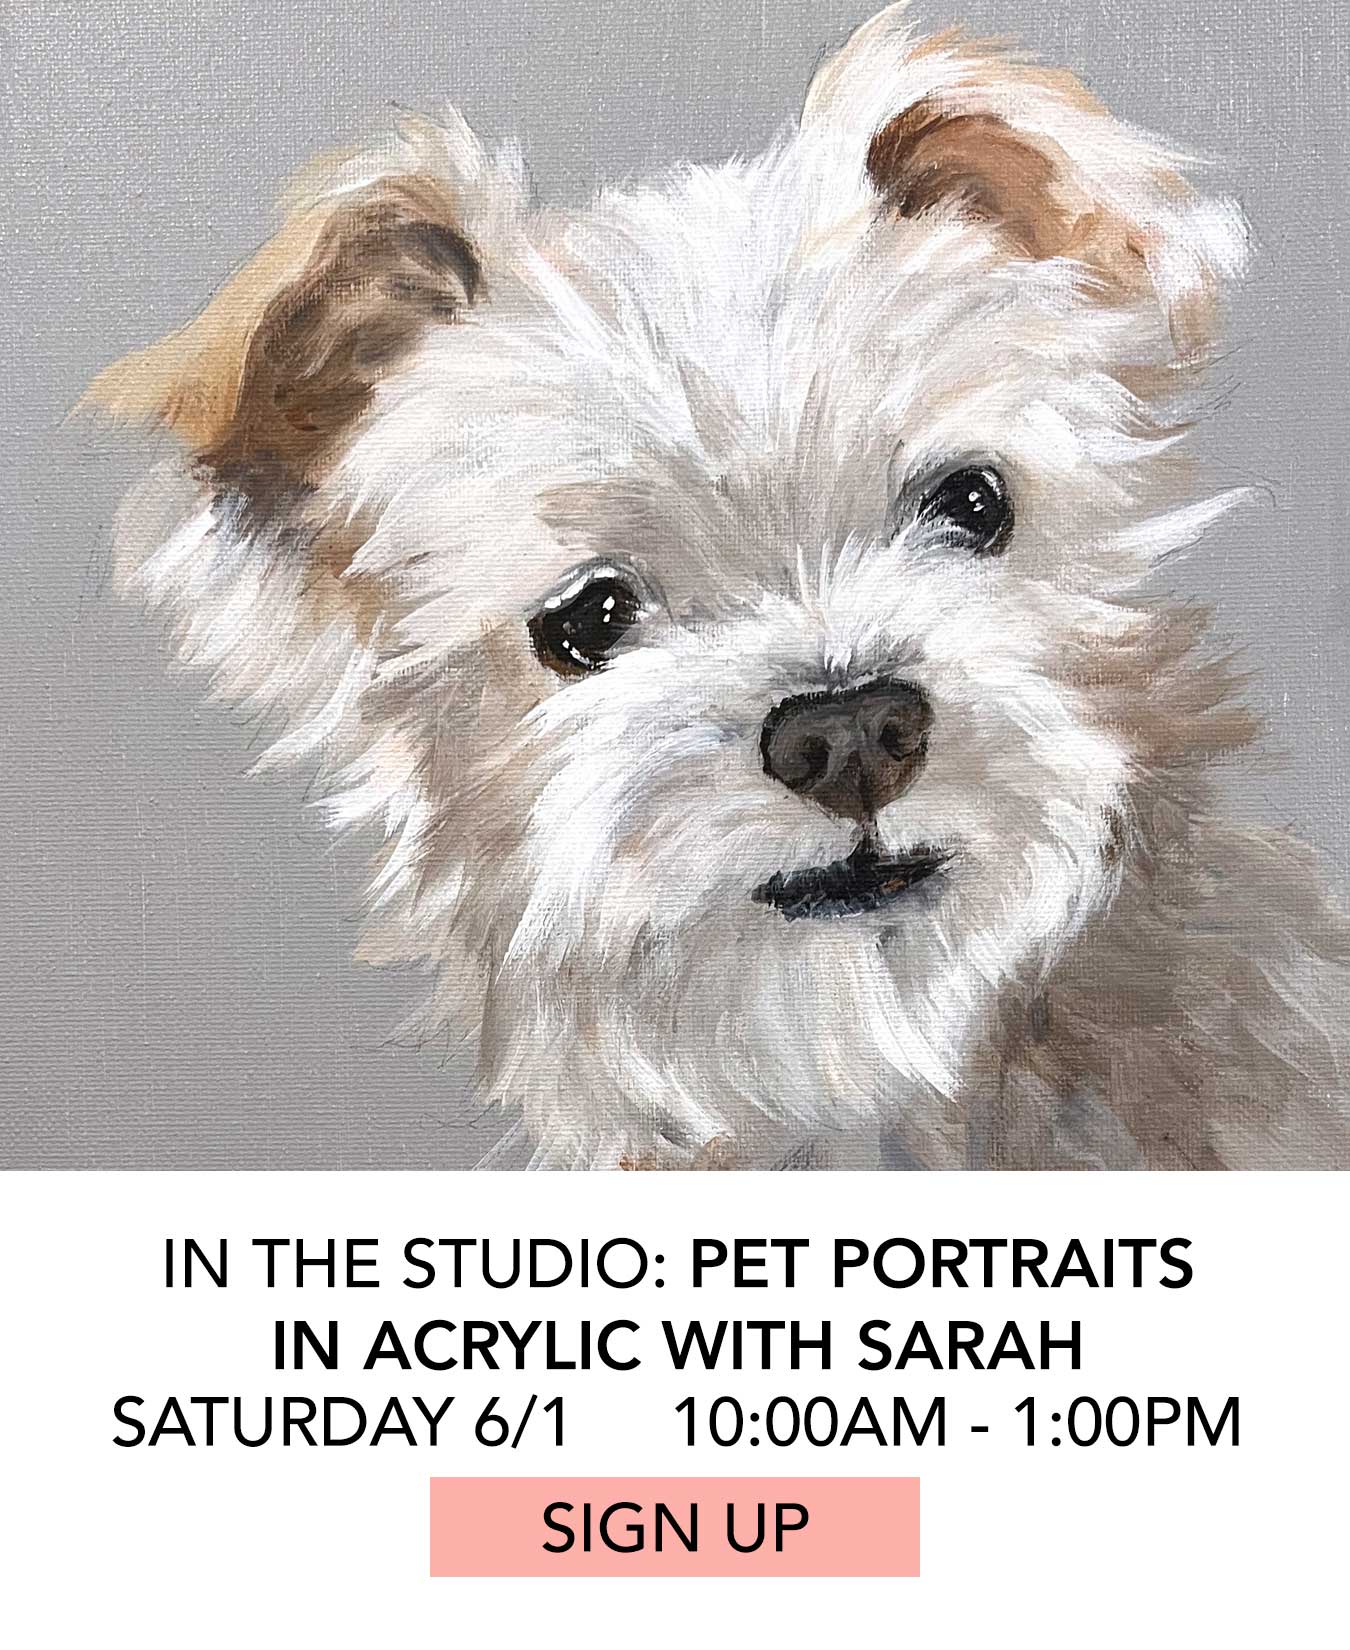 In the Studio: Pet Portraits in Acrylic with Sarah Lew. Saturday 6/1 from 10:00am to 1:00pm. Click to Sign Up.